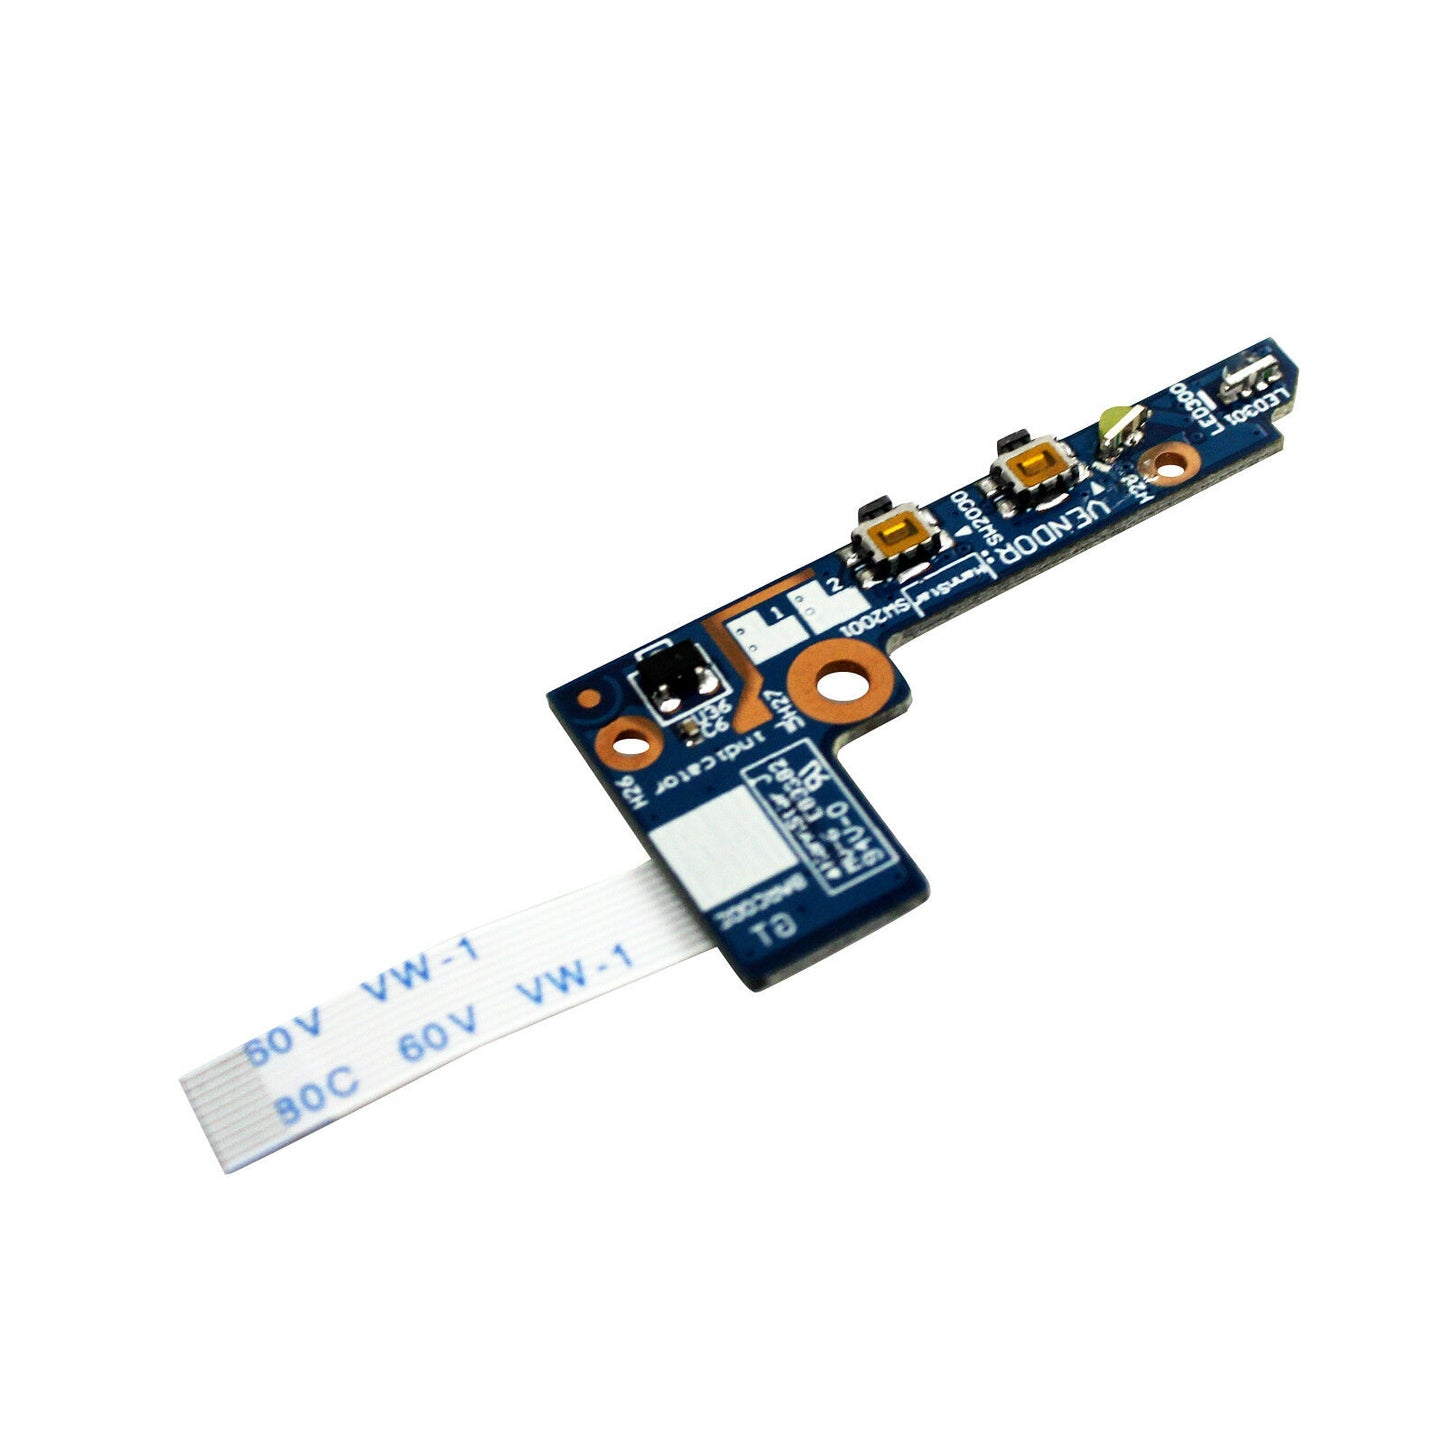 Lenovo NS-A201 New Power Button Board with Cable Yoga 2 11 20332 20428 43508112001 90005666 NBX00019Q00